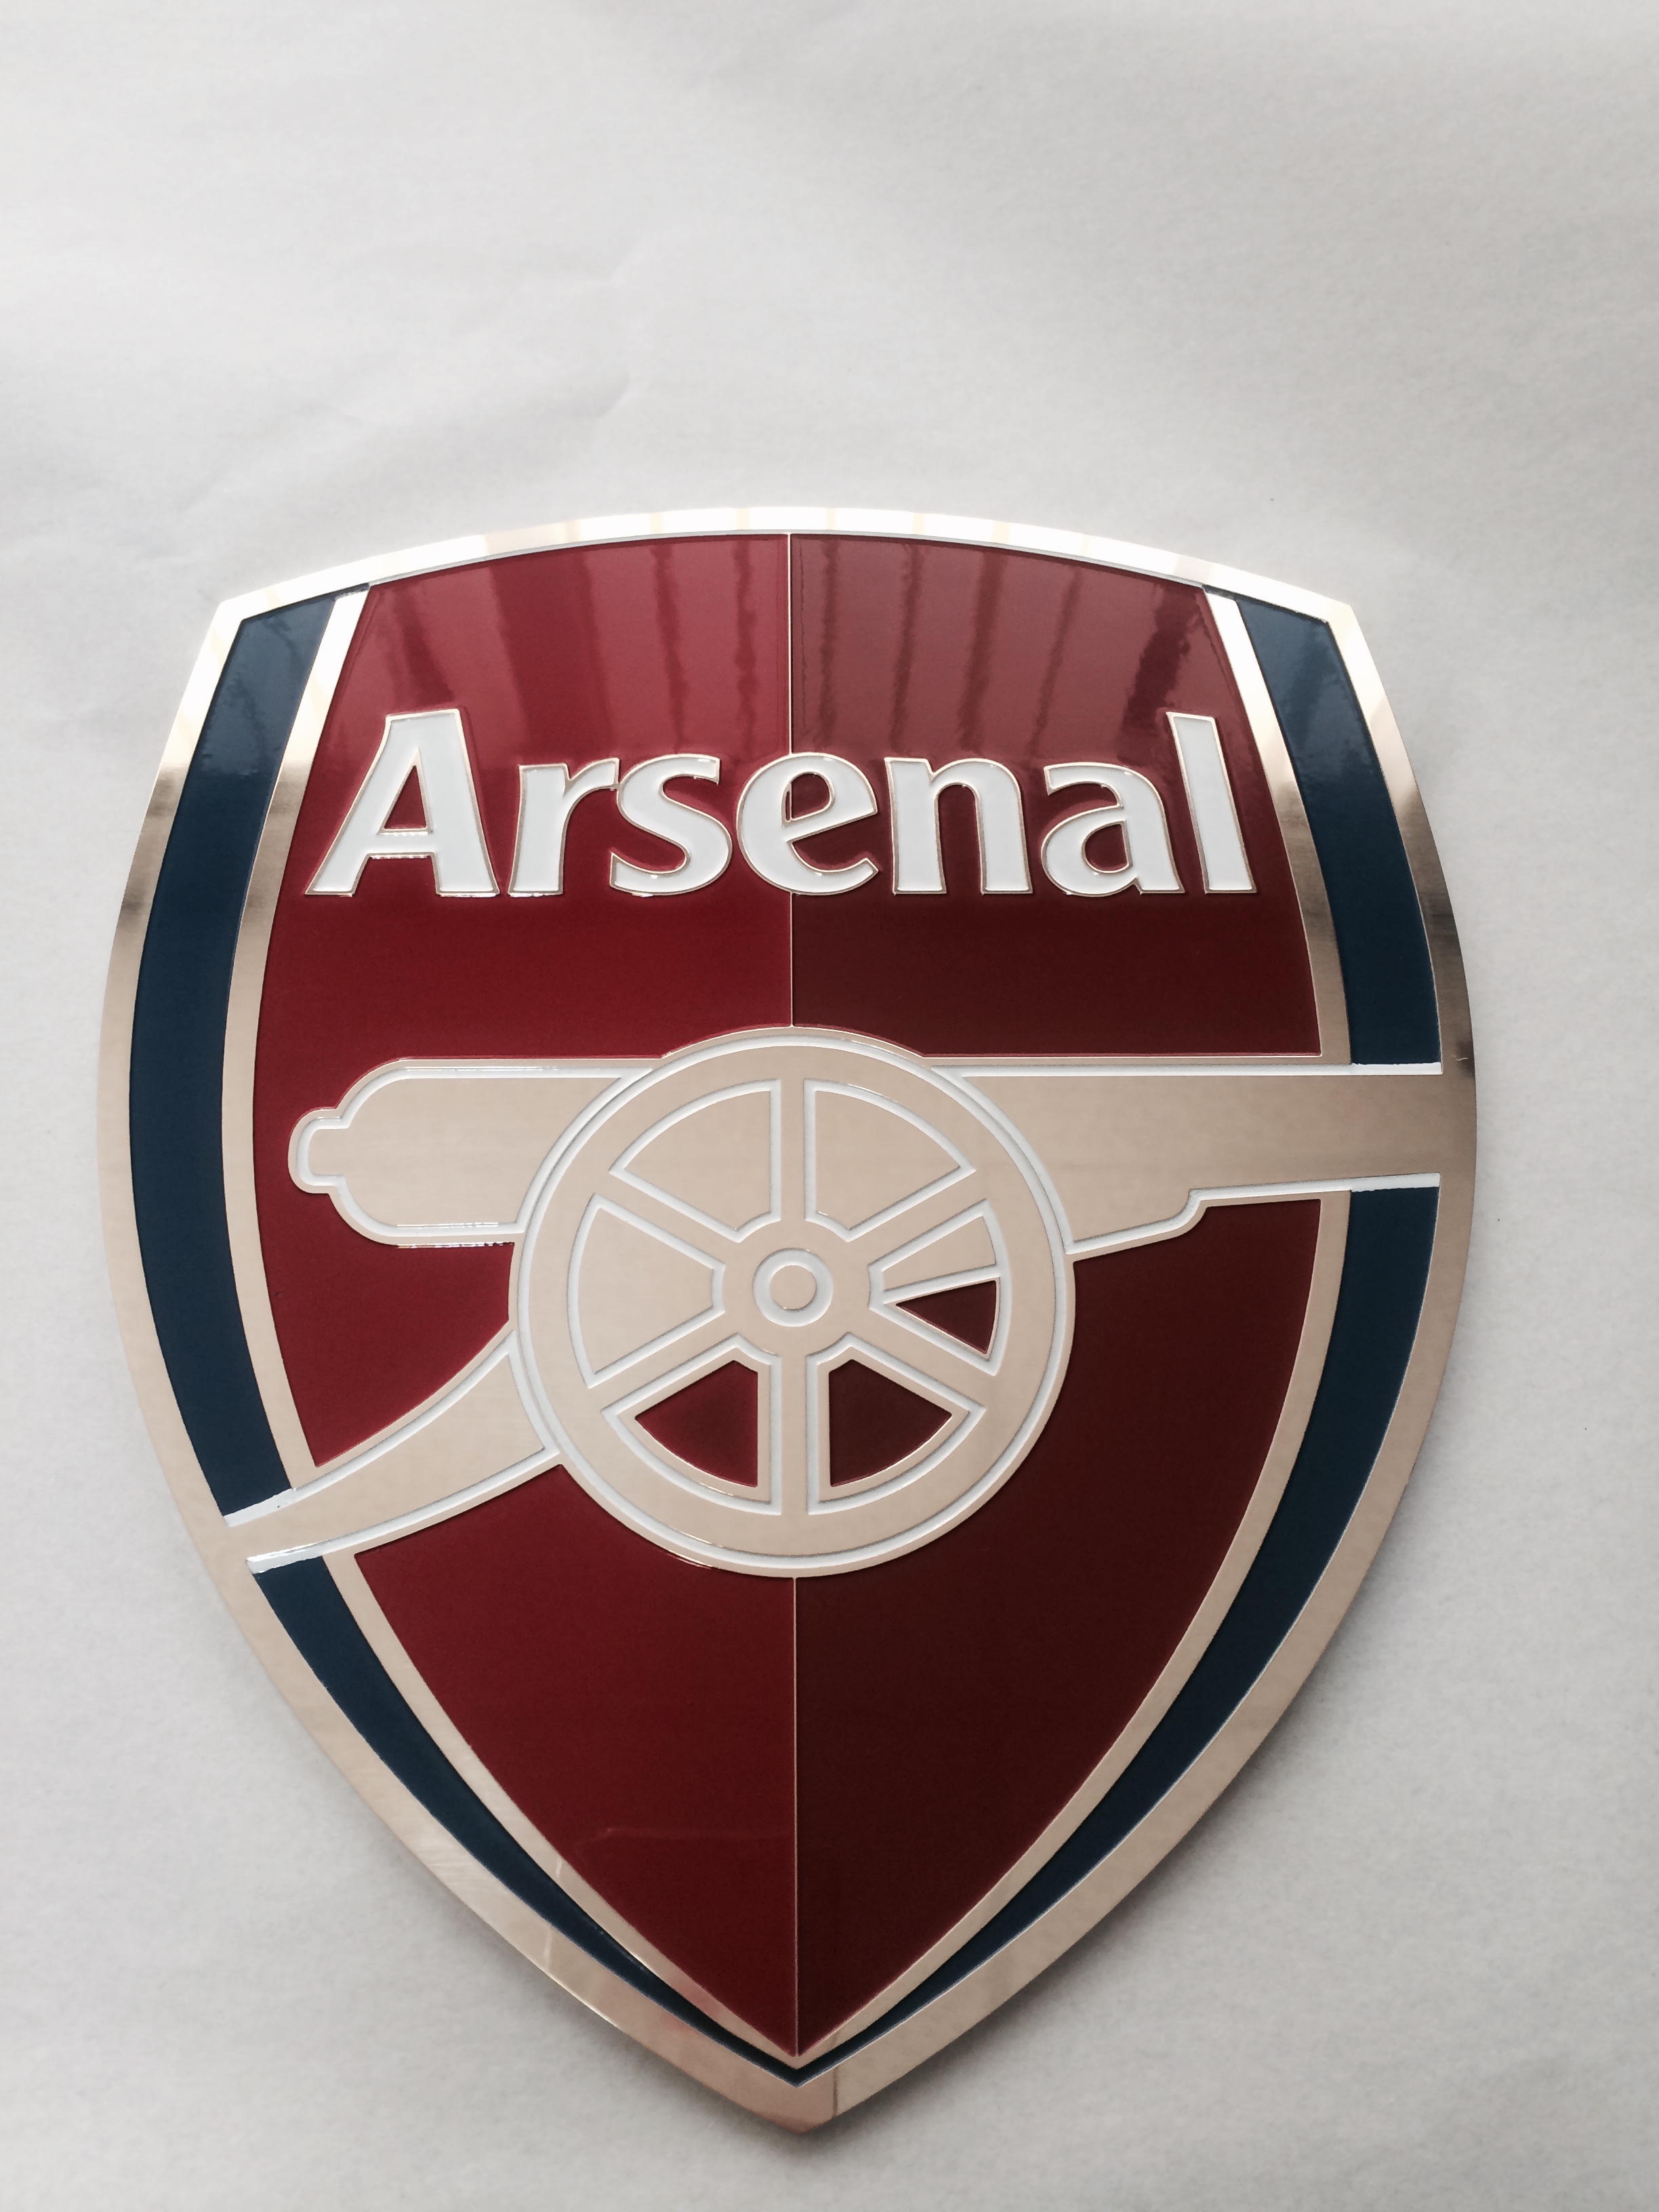 Prestigious Chemically Etched and Multi Colour Infilled badges made for Arsenal football stadium